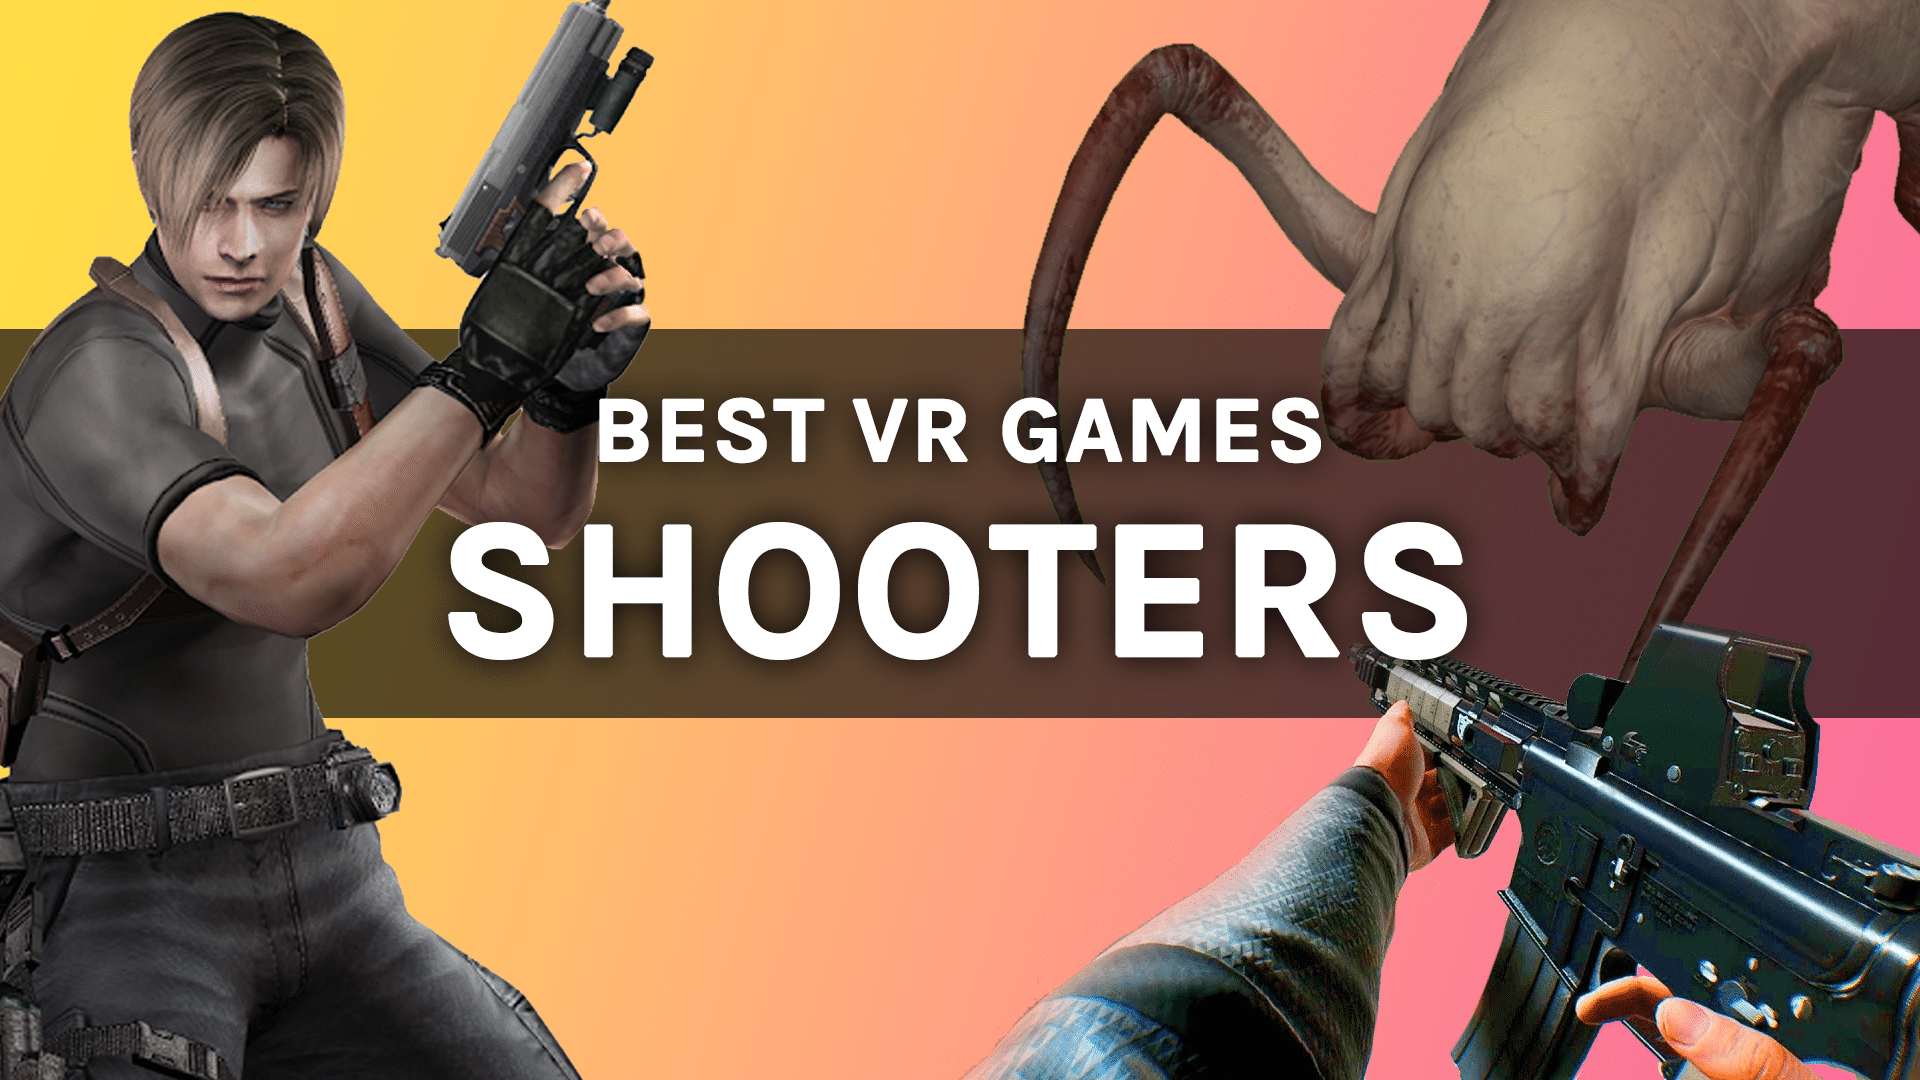 Best Shooters And FPS Games: Top Picks On Quest, PSVR, And VR